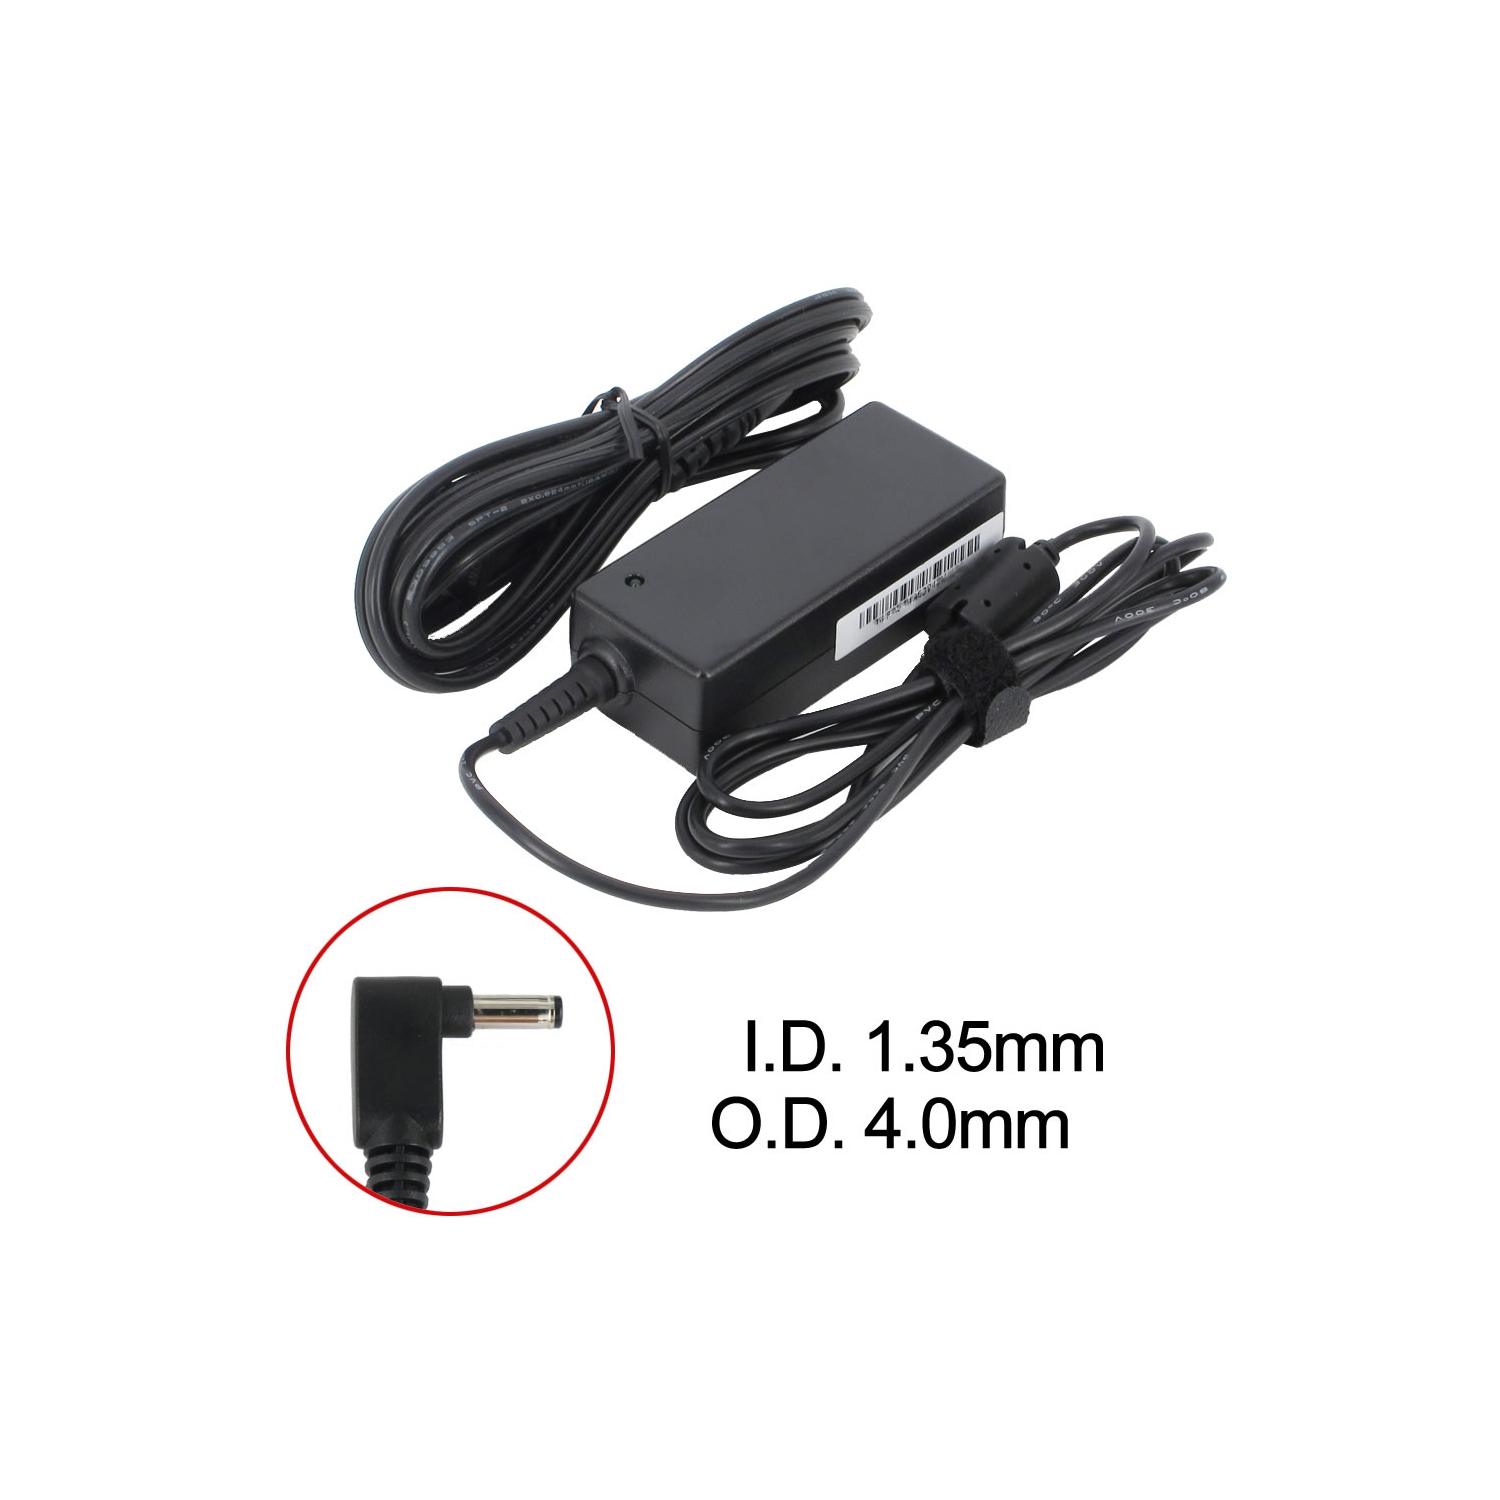 BattDepot: New Laptop AC Adapter for Asus VivoBook Max X541NA-GQ028, 0A001-00232100, 0A001-00340200, EXA1206UH